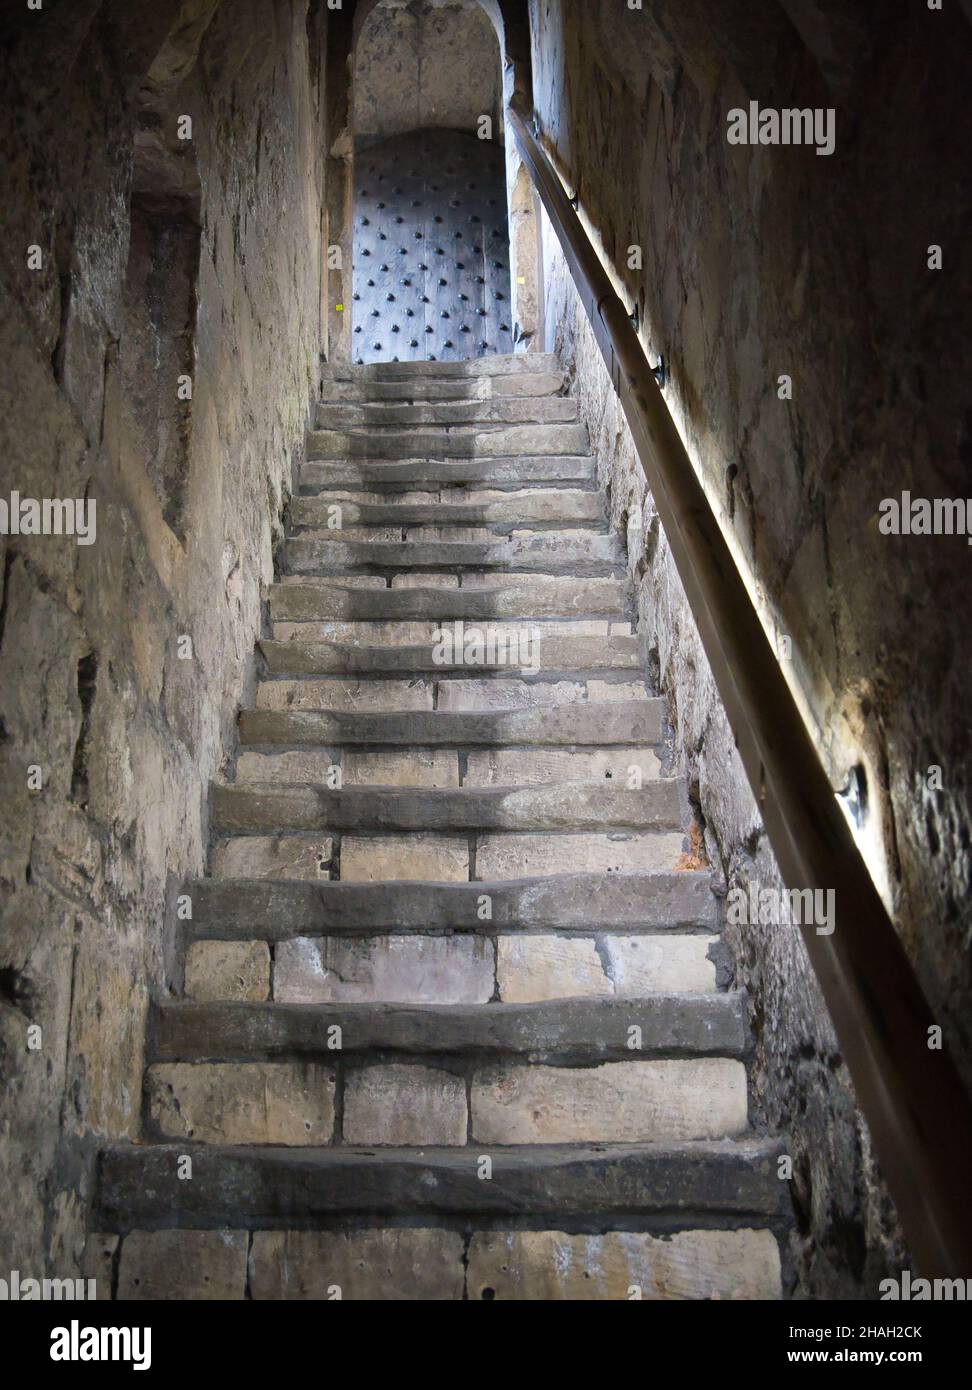 A steep flight of very old, stone steps between two stone walls leading to a studded wooden door. A handrail runs the length of the stairs. Stock Photo